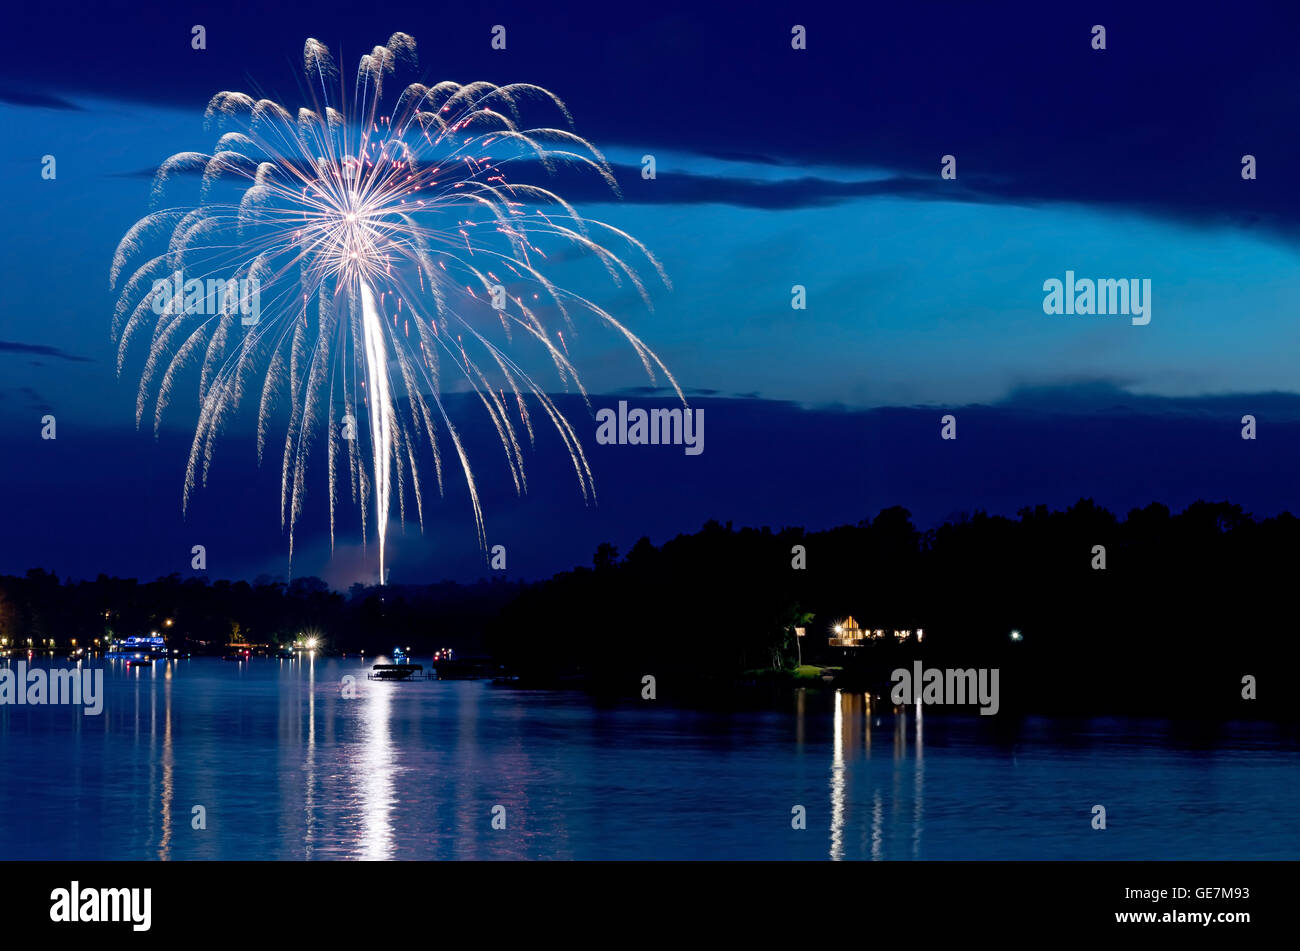 steamboat bay in east gull lake during fourth of july fireworks celebration over lake Stock Photo